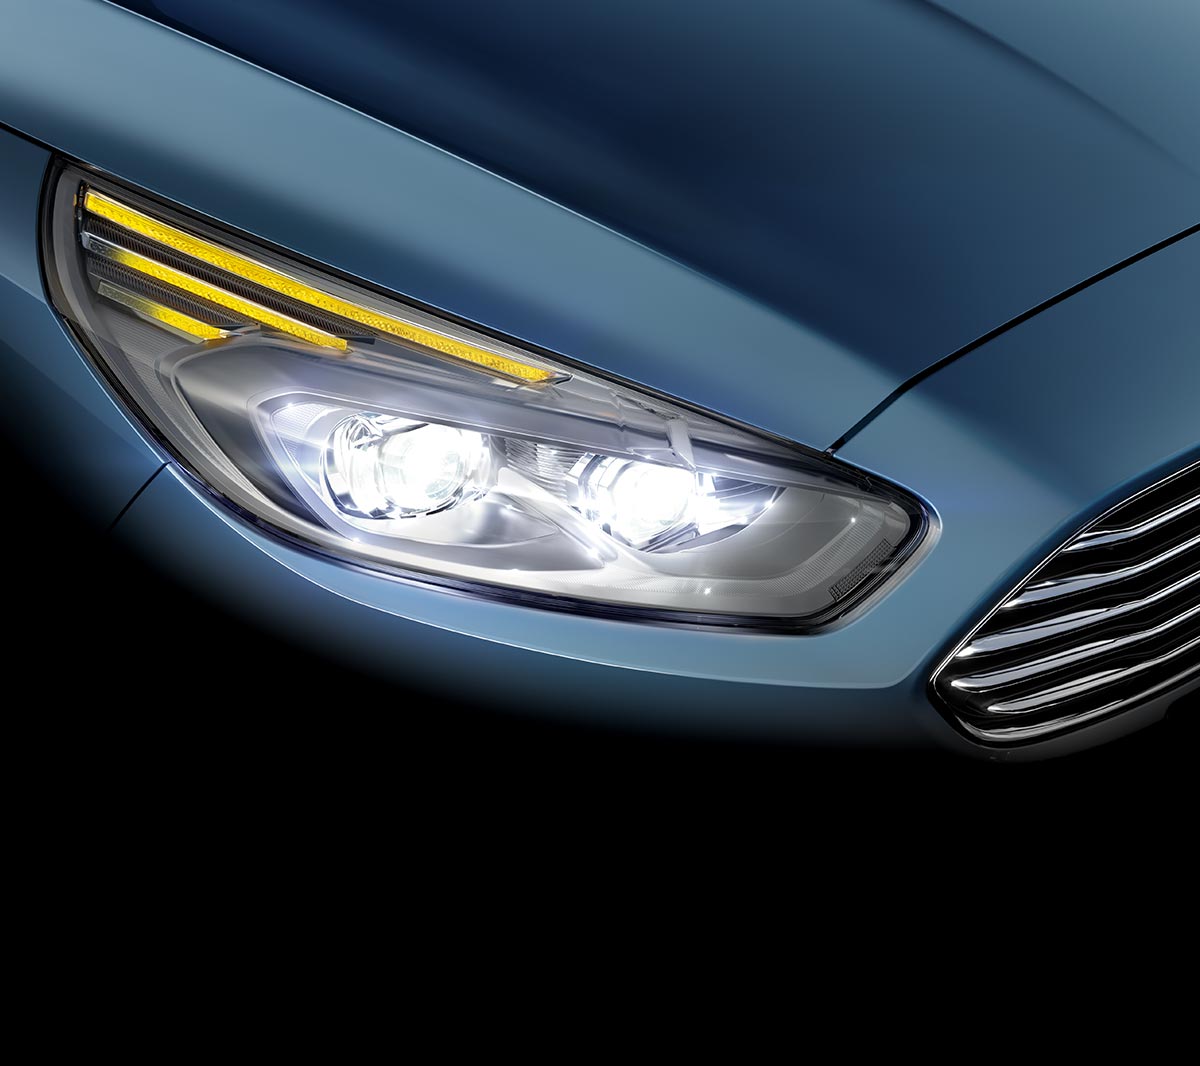 Ford S-MAX head light style car is in Chrome Blue